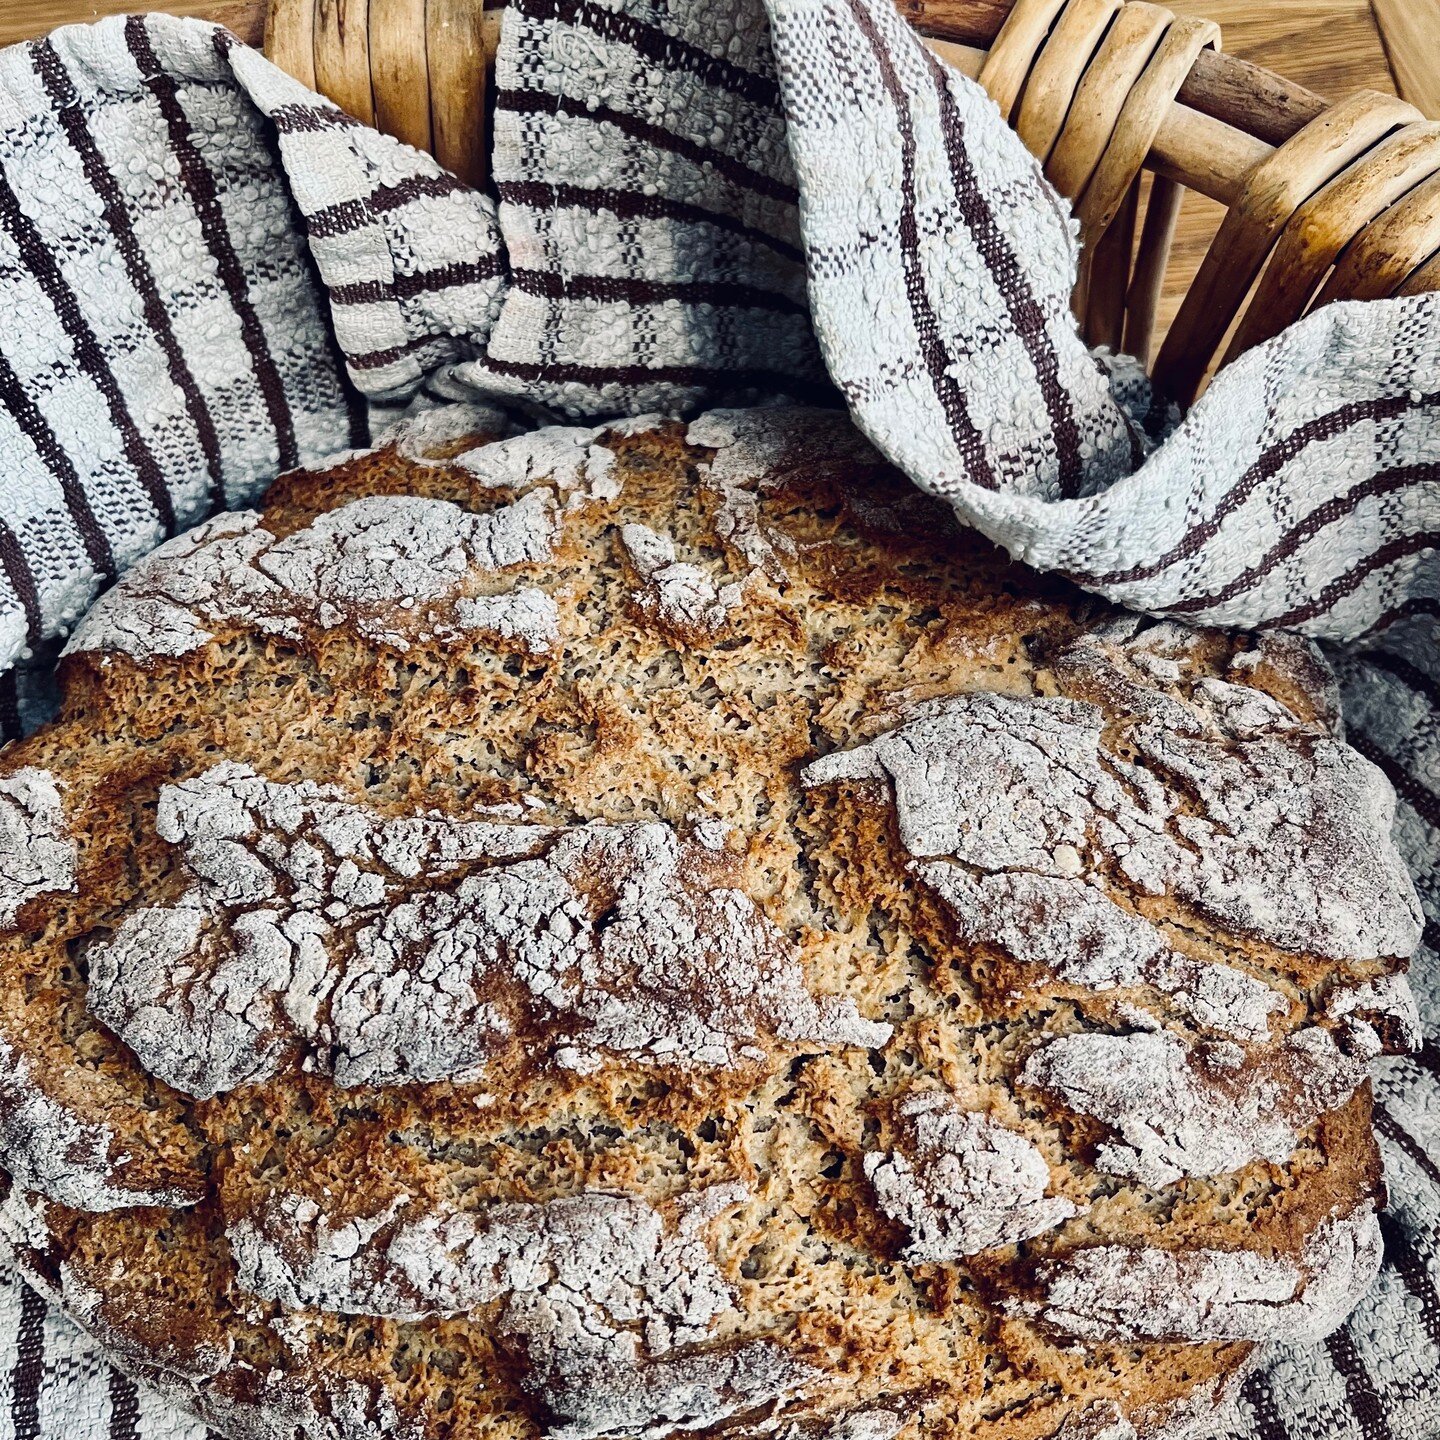 The Lammas loaf. Blessings of the season!⁣
⁣
At Lughnasadh we give thanks to the Great Mother for her abundance of blessings and for our own personal growing. Sometimes she likes to give us a kick up the arse so that we can better learn how to open o